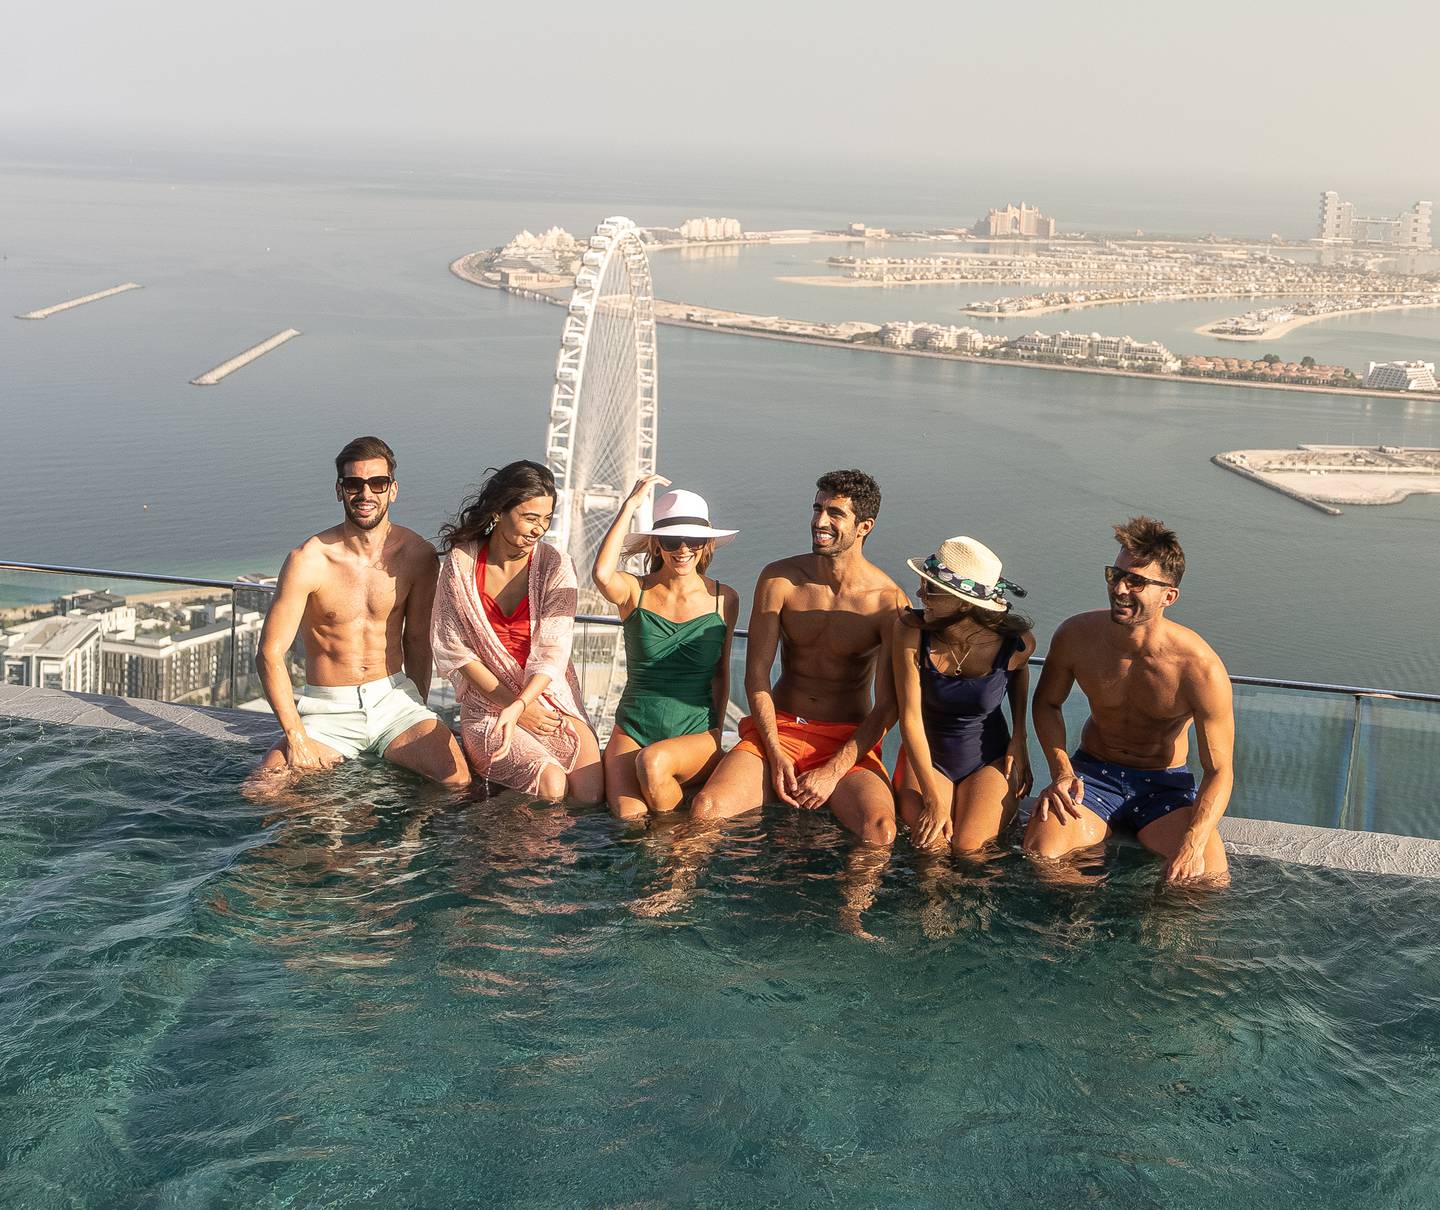 Grab your friends for a luxury daycation at the world's highest infinity swimming pool in Dubai. Photo: Zeta Seventy Seven